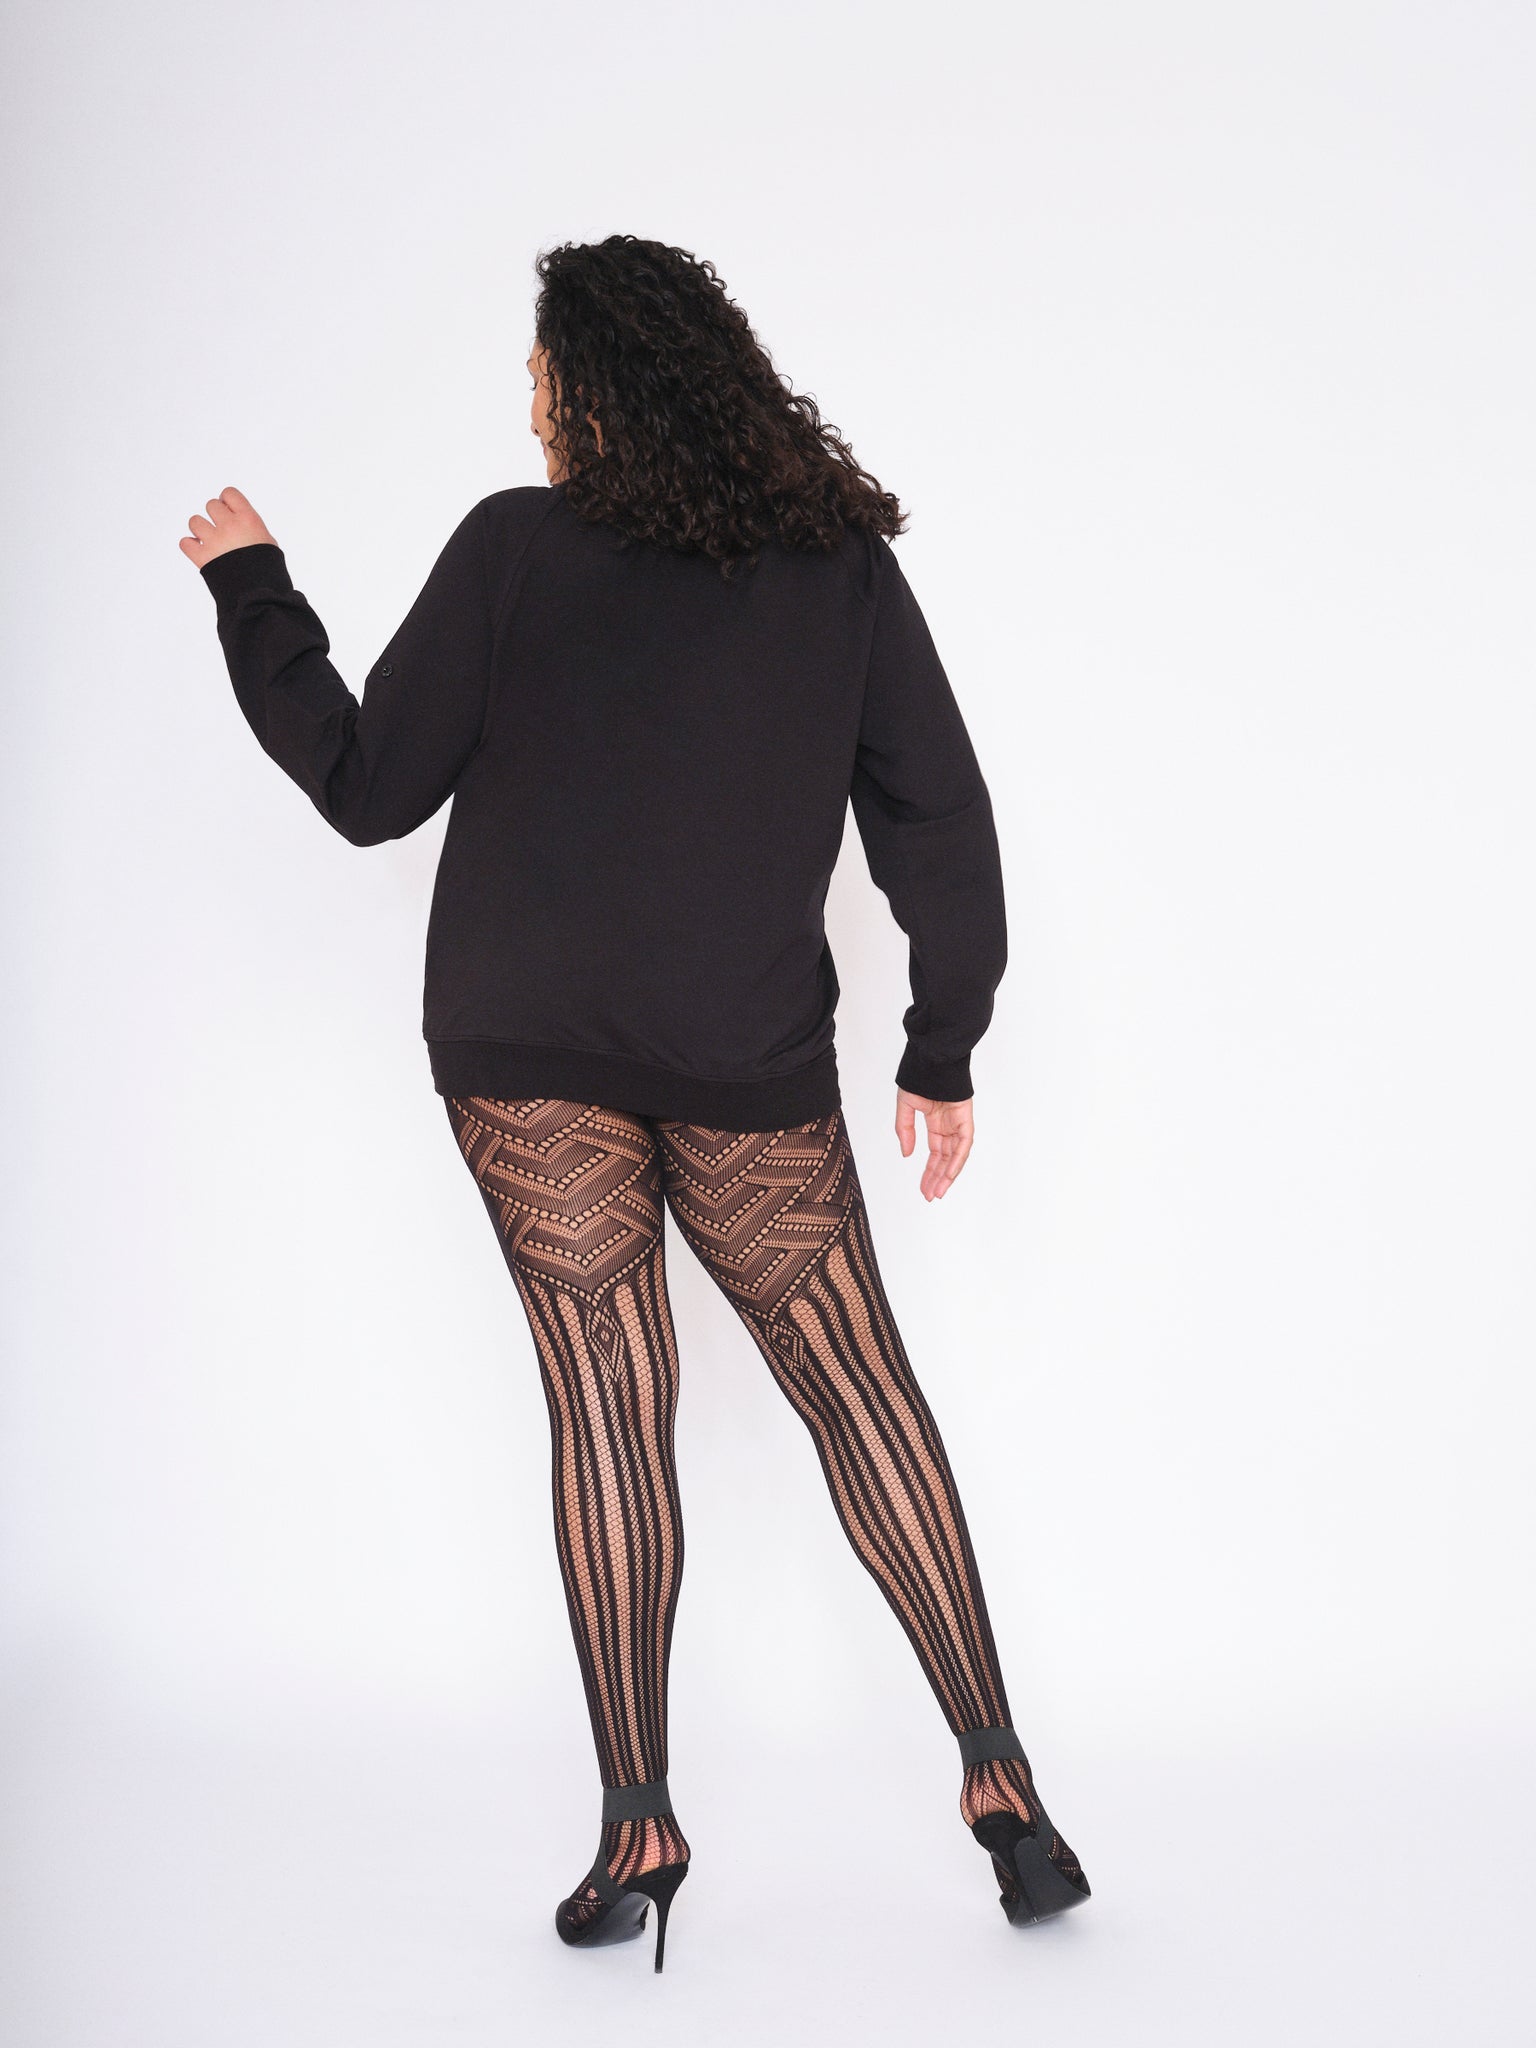 Disstressed Vintage Couture LV DESIGNER ON MY LEGS TIGHTS $35.00